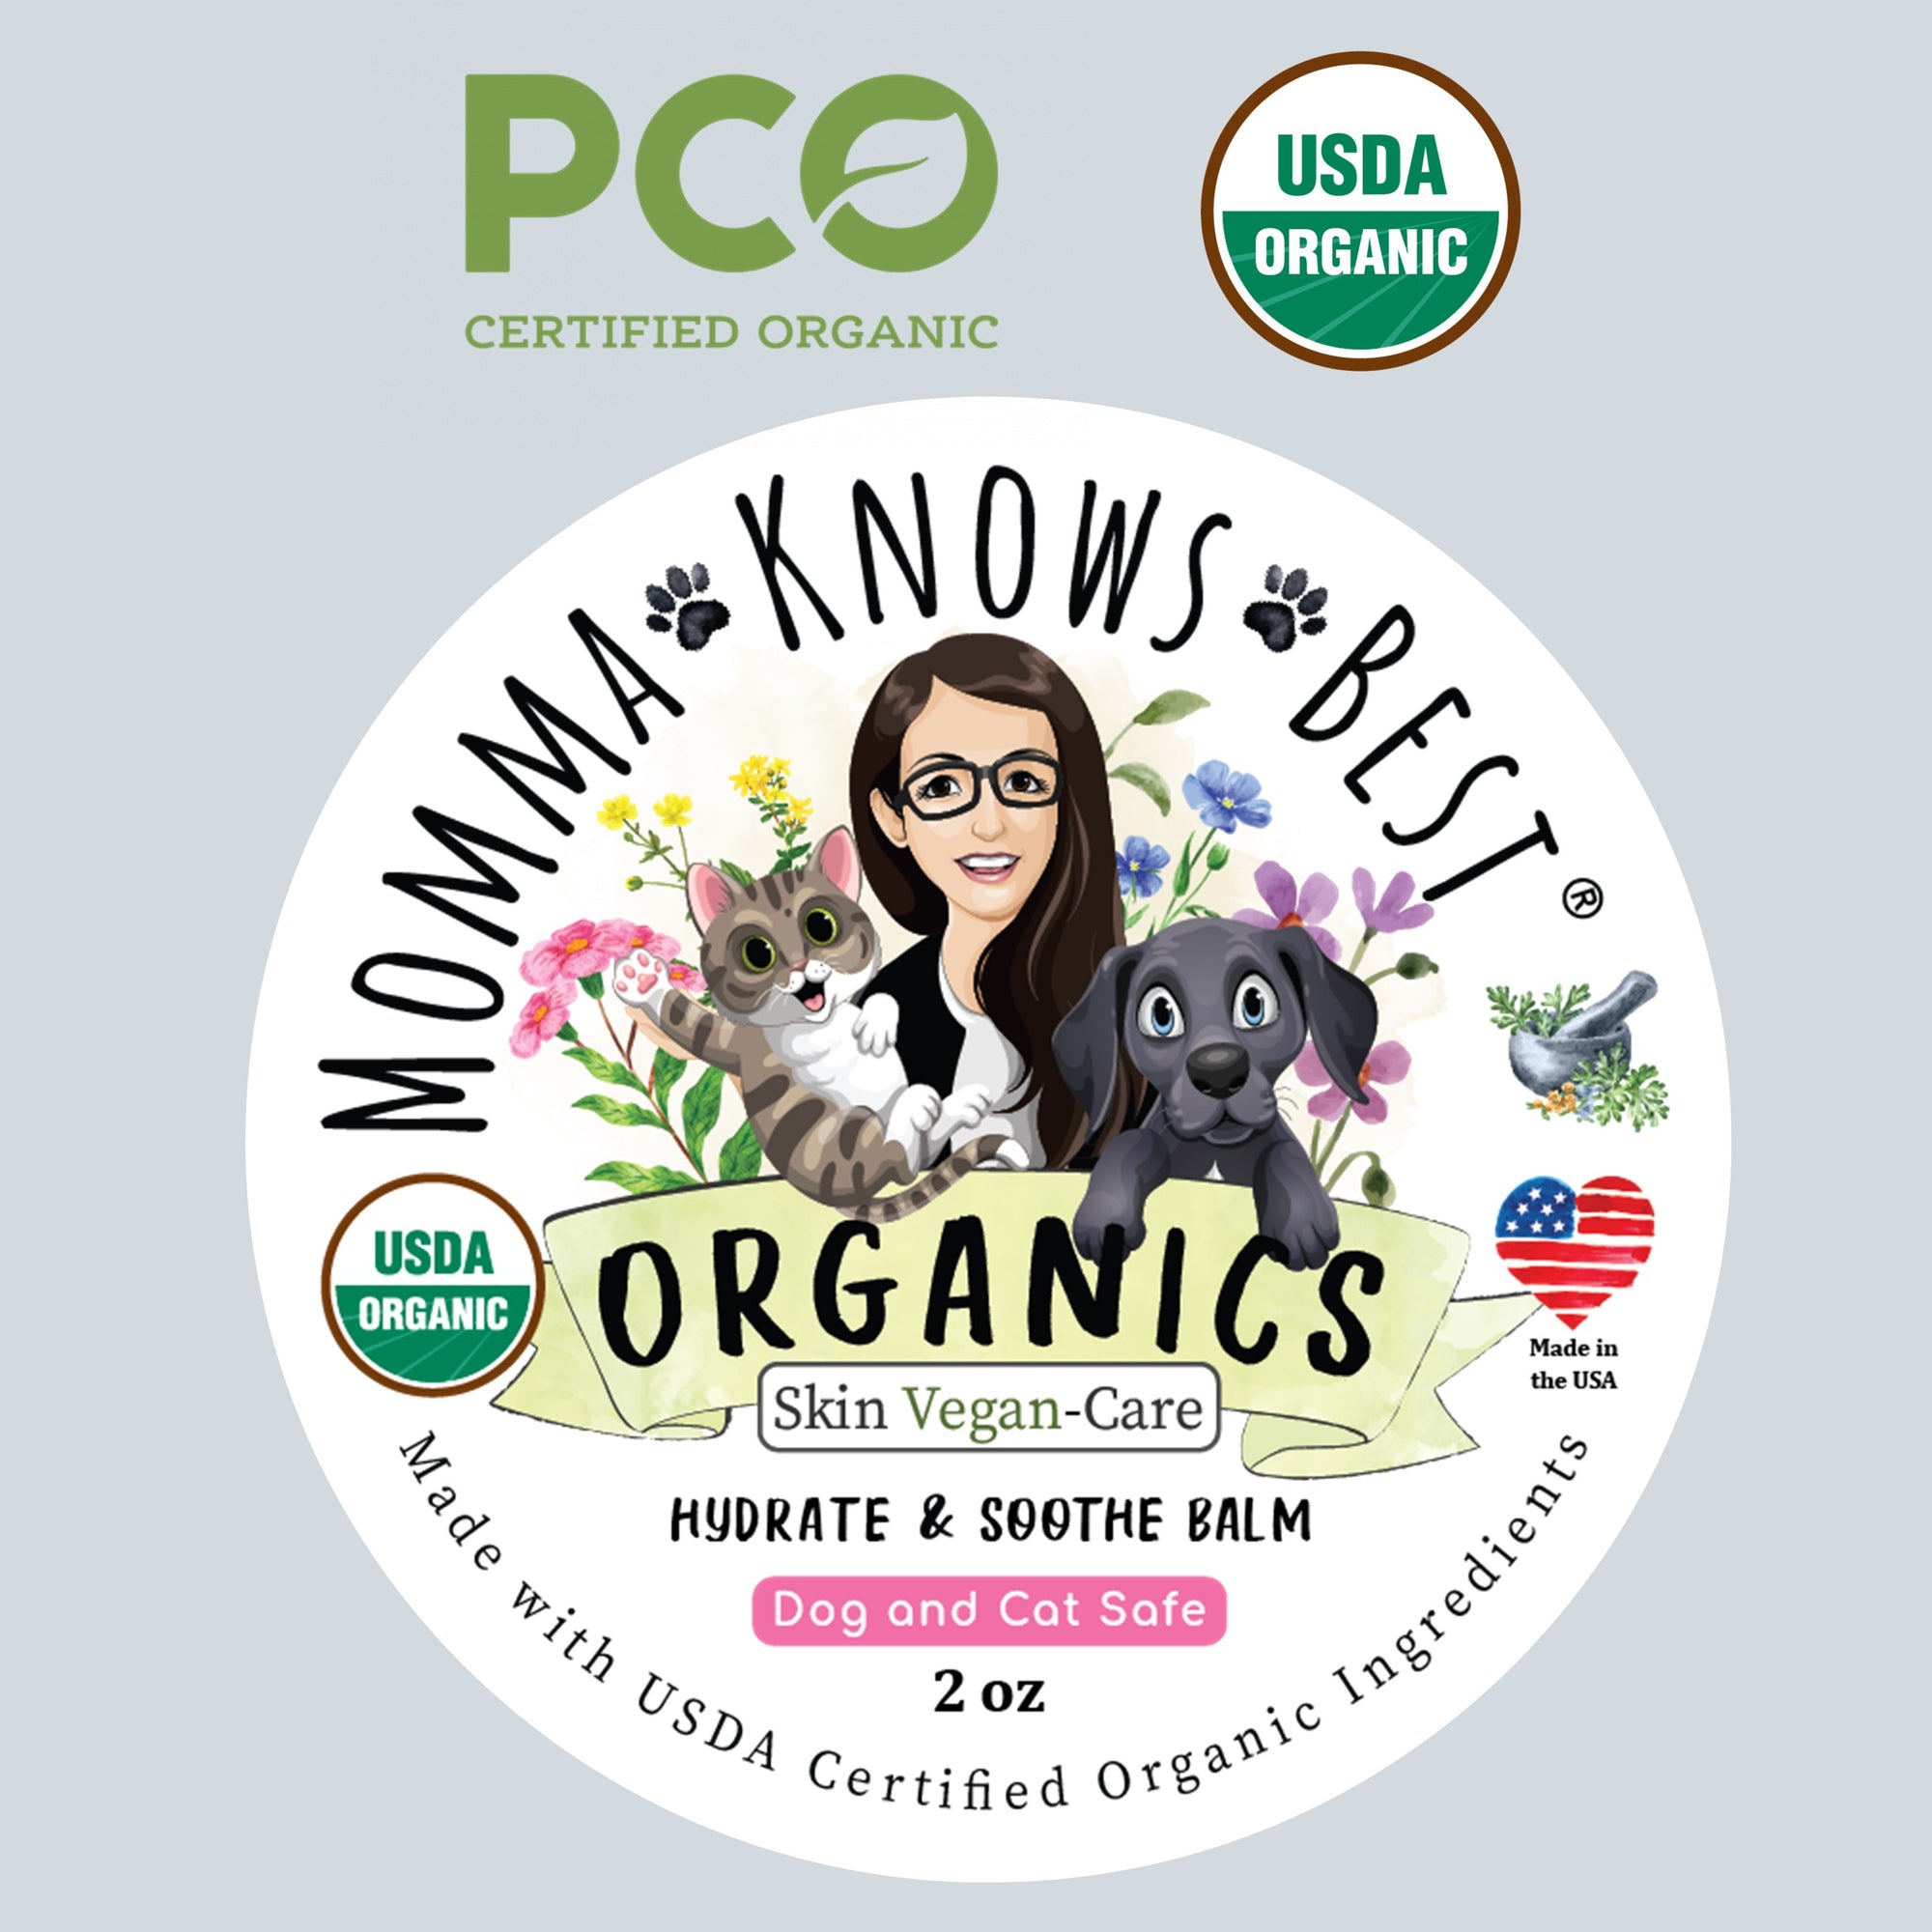 Certified organic by PCO